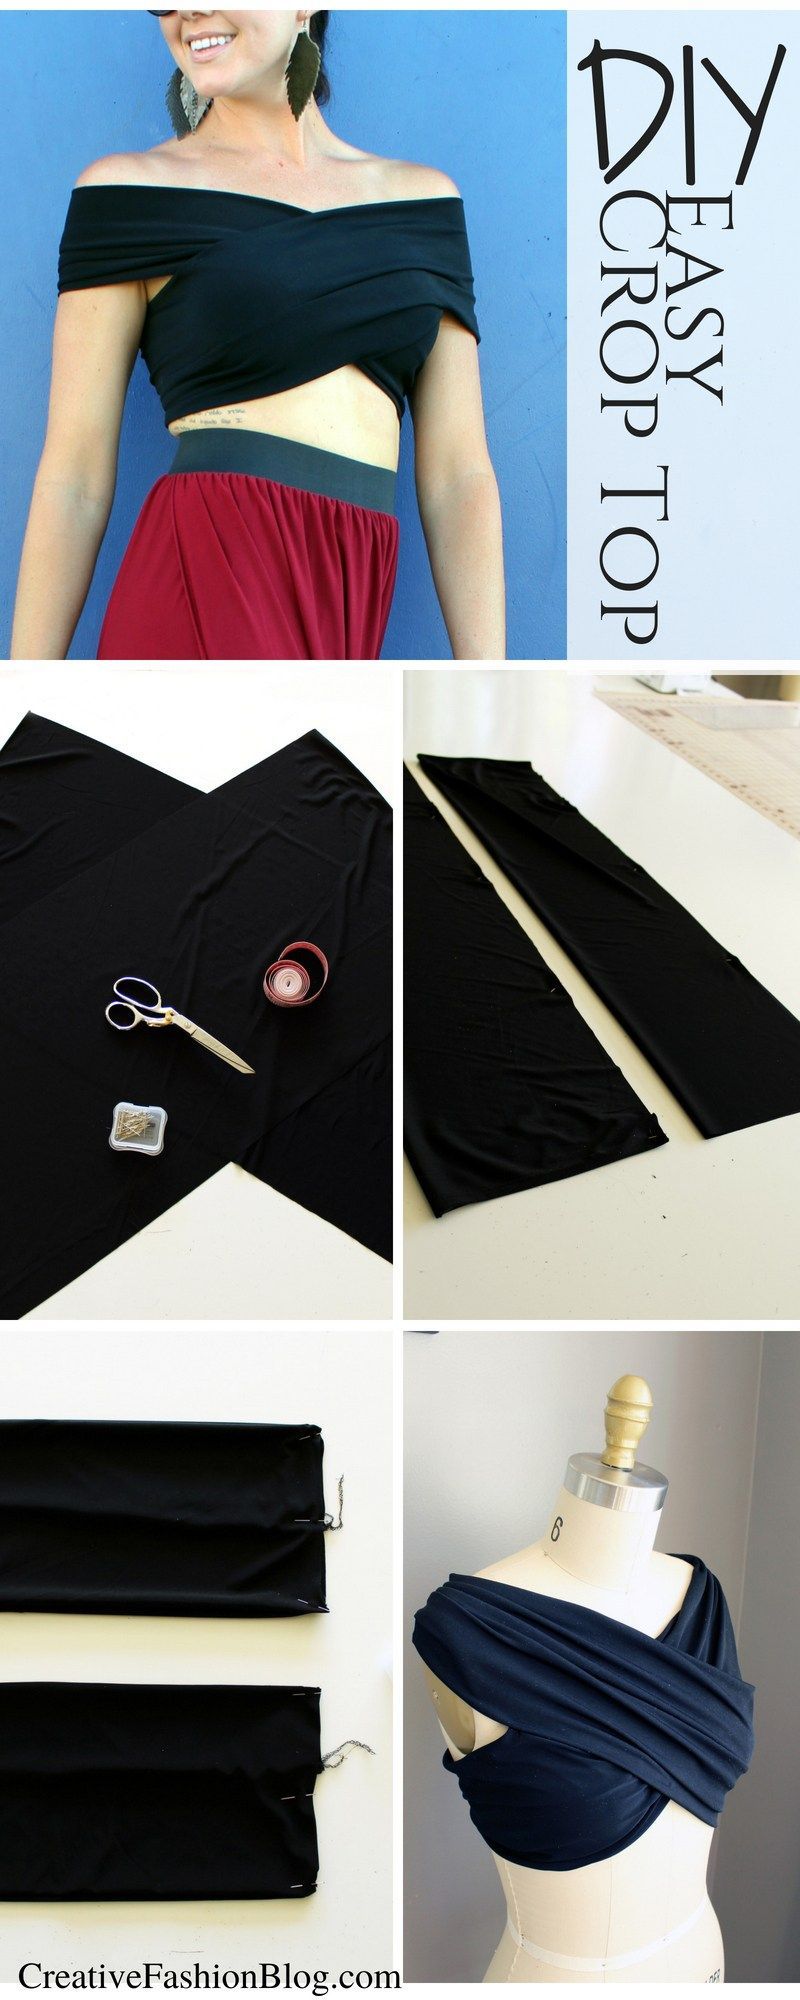 How To Sew An Easy Summer DIY Crop Top - Creative Fashion Blog - How To Sew An Easy Summer DIY Crop Top - Creative Fashion Blog -   17 diy Fashion no sew ideas